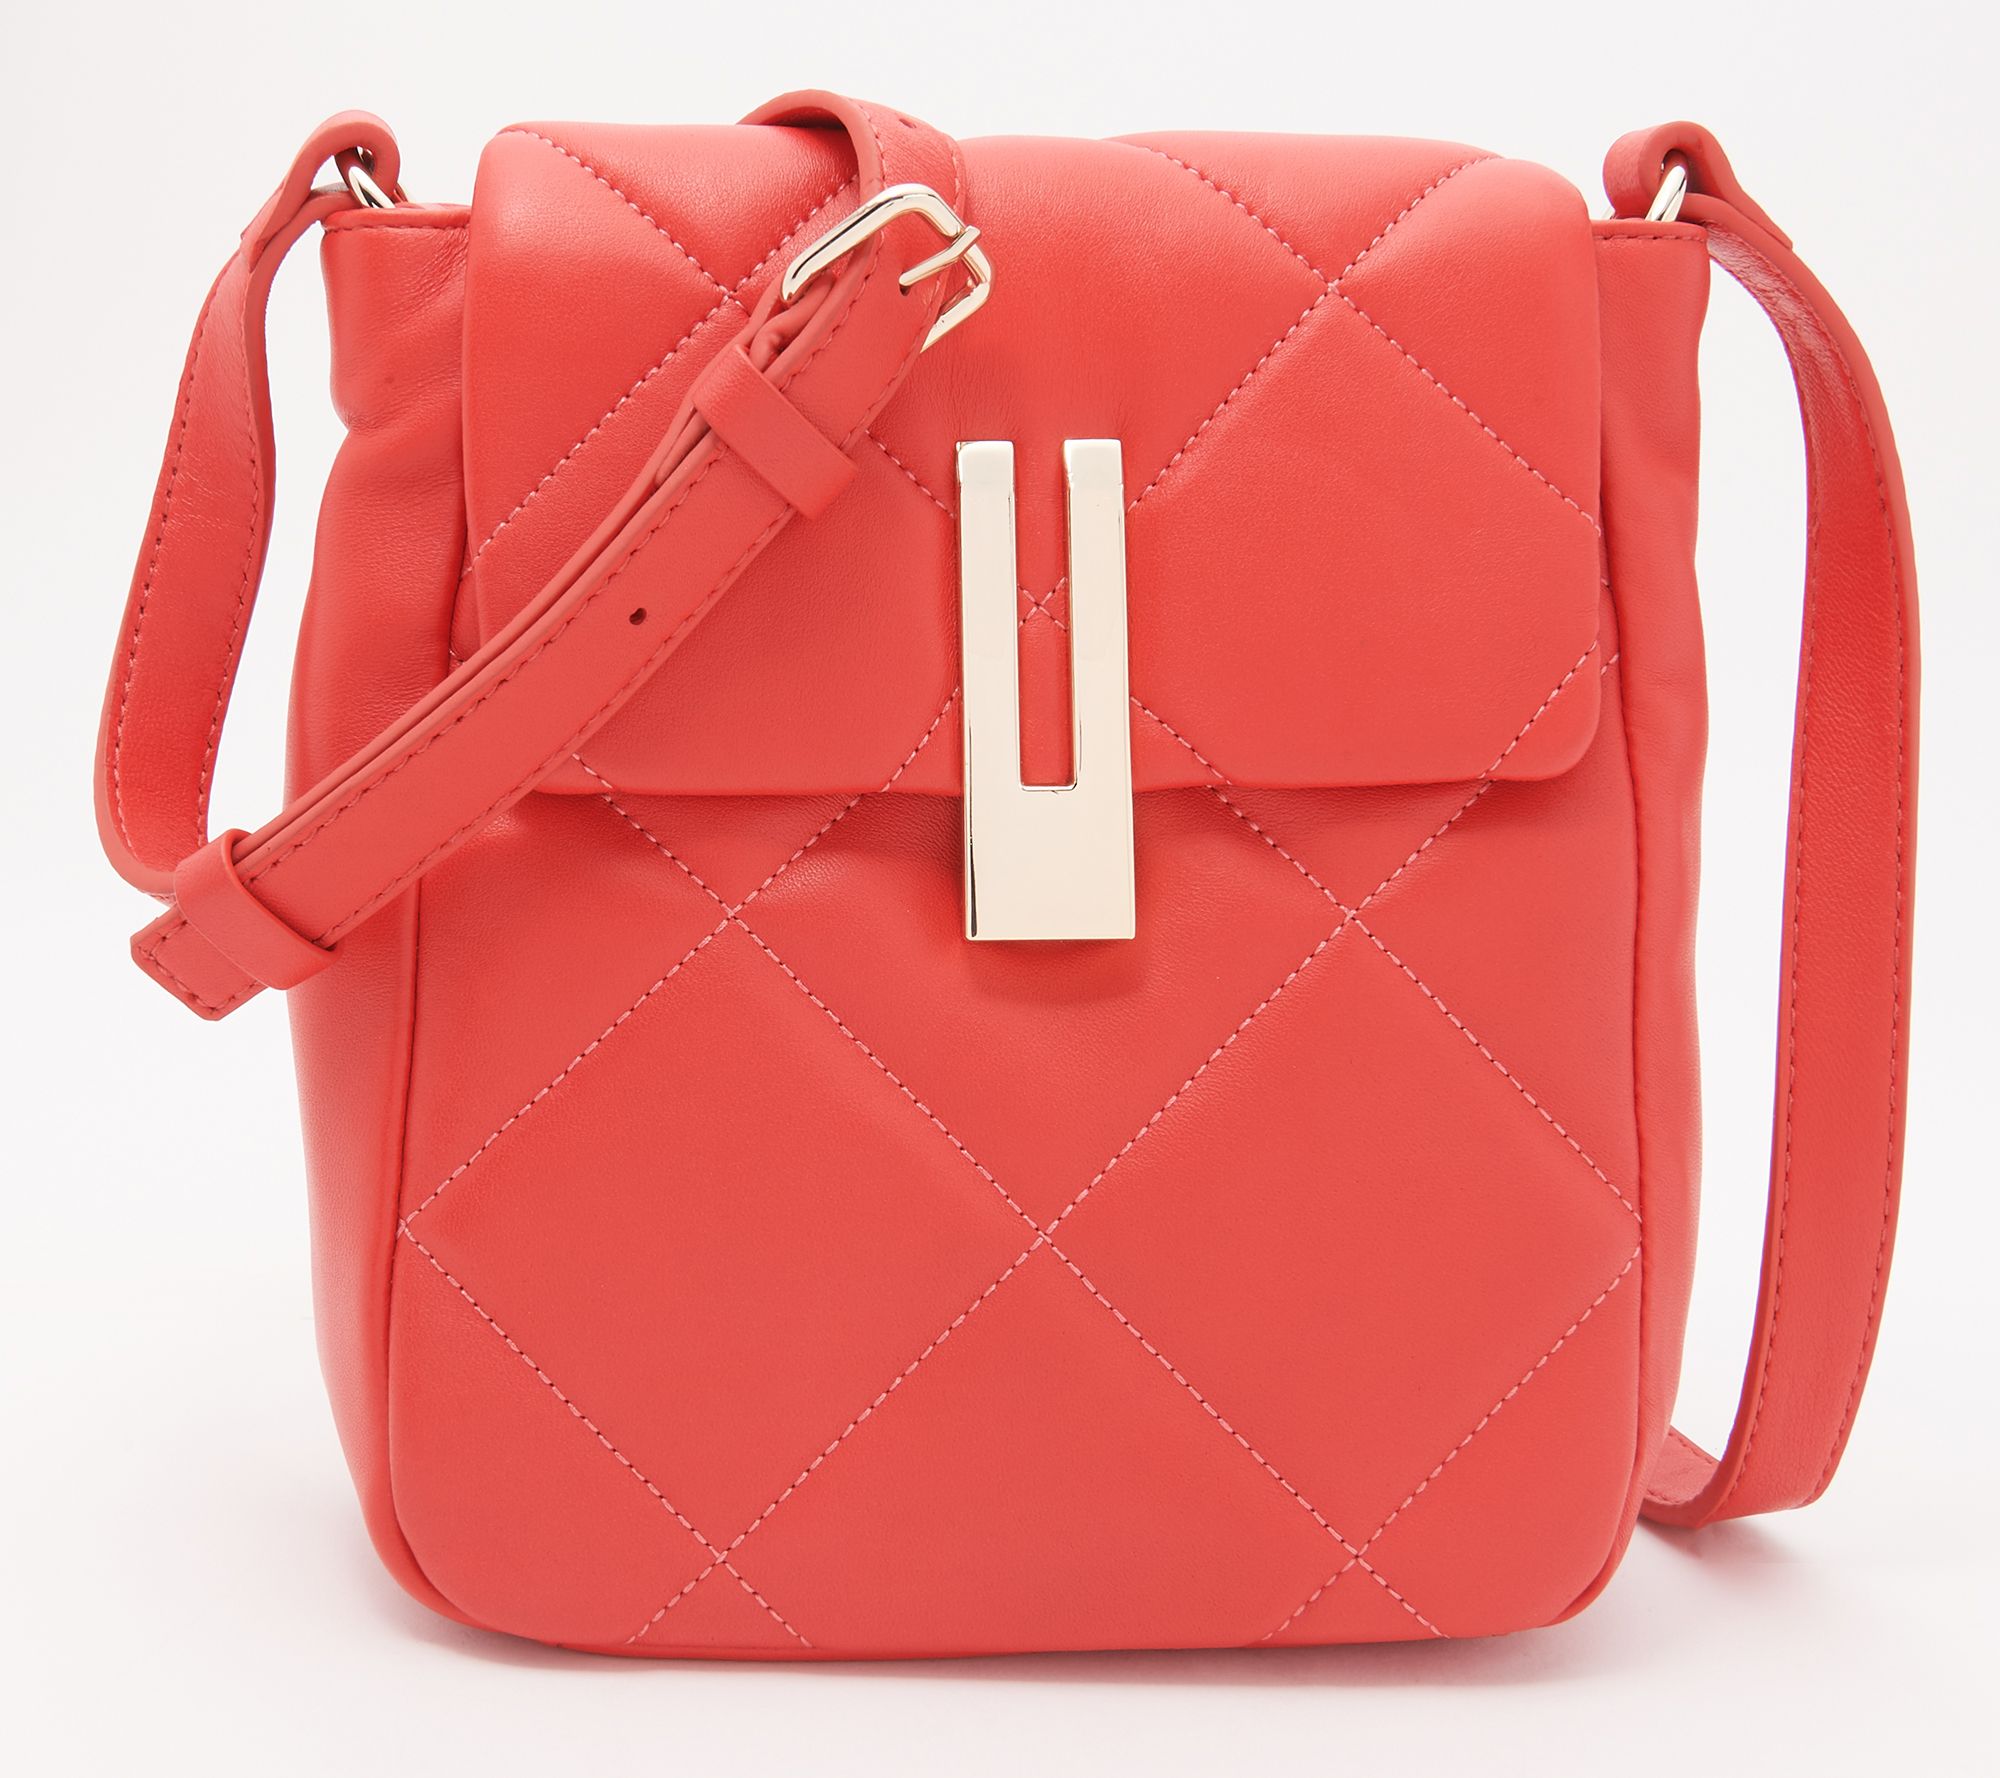 Vince Camuto Quilted Leather Crossbody -Doty